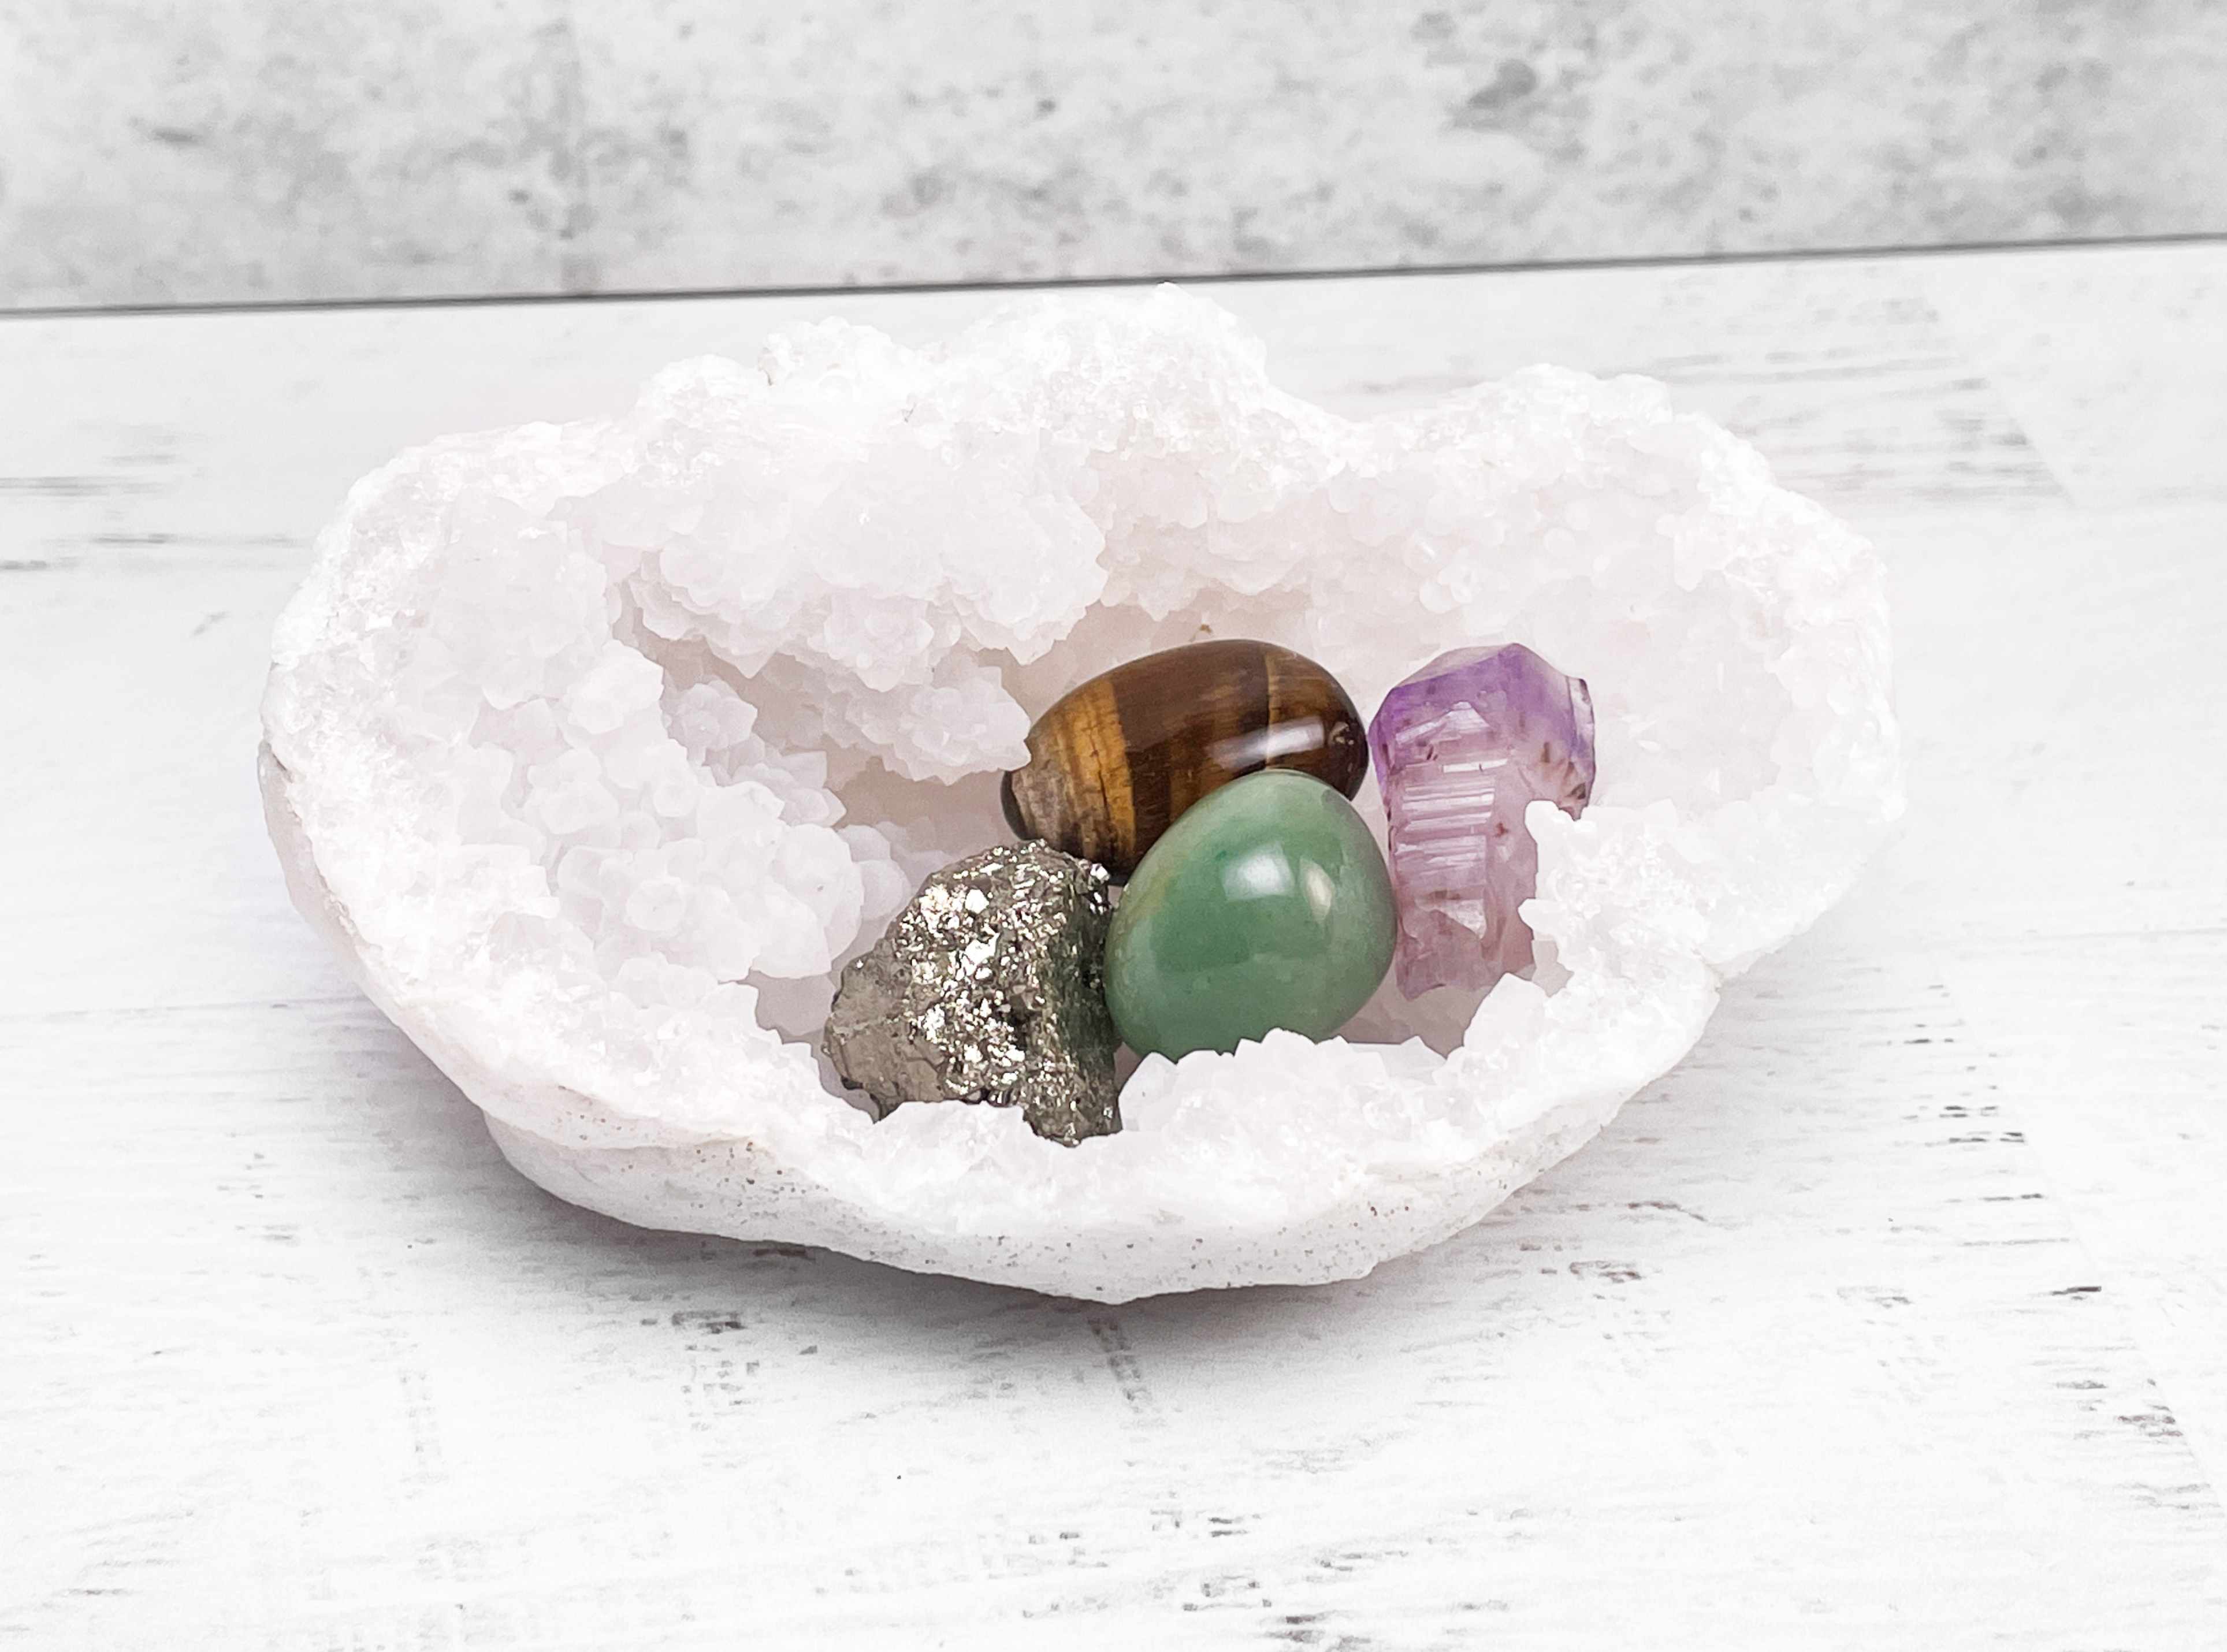 Buy Online Latest and Unique Addiction Recovery / Sobriety Crystals Pocket Bundle | Shop Best Spiritual Items - The Mystical Ritual